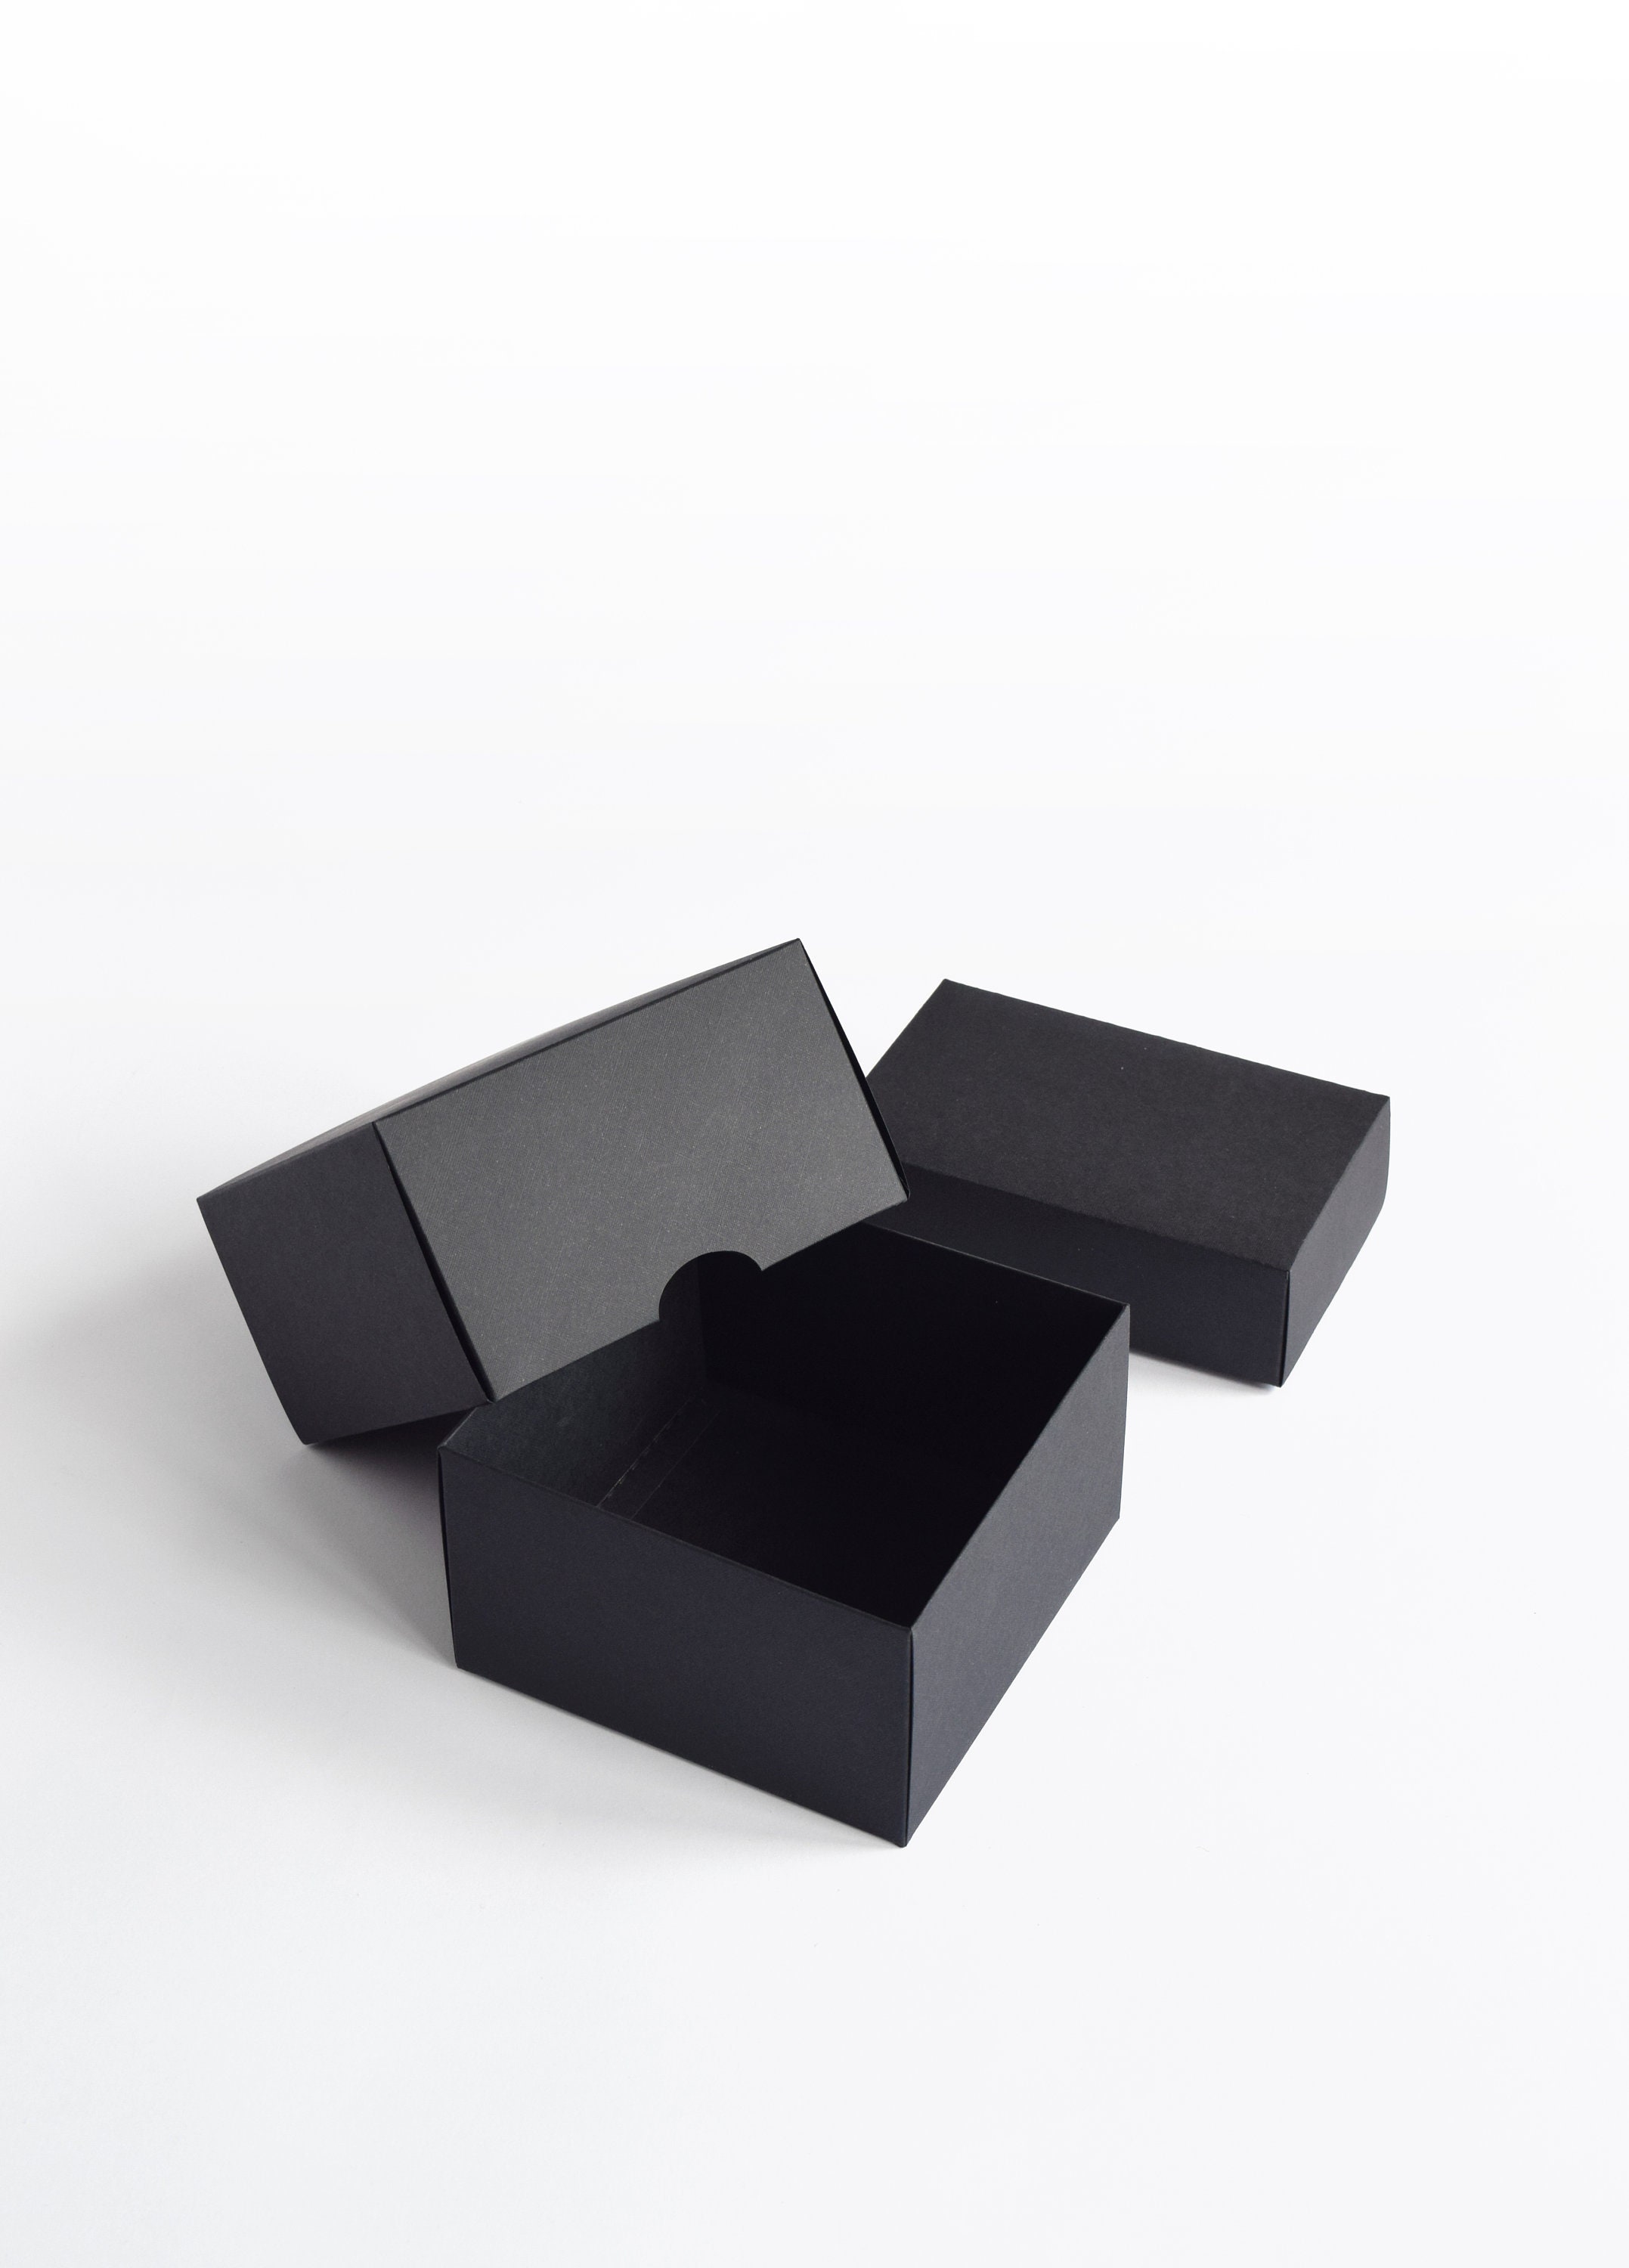 BLACK Storage Box for # 7 Glassine Envelopes., 14-1/4 x 7 x 4-3/4., Made  from .040 thick chipboard. , Wrapped in embossed black paper. 2